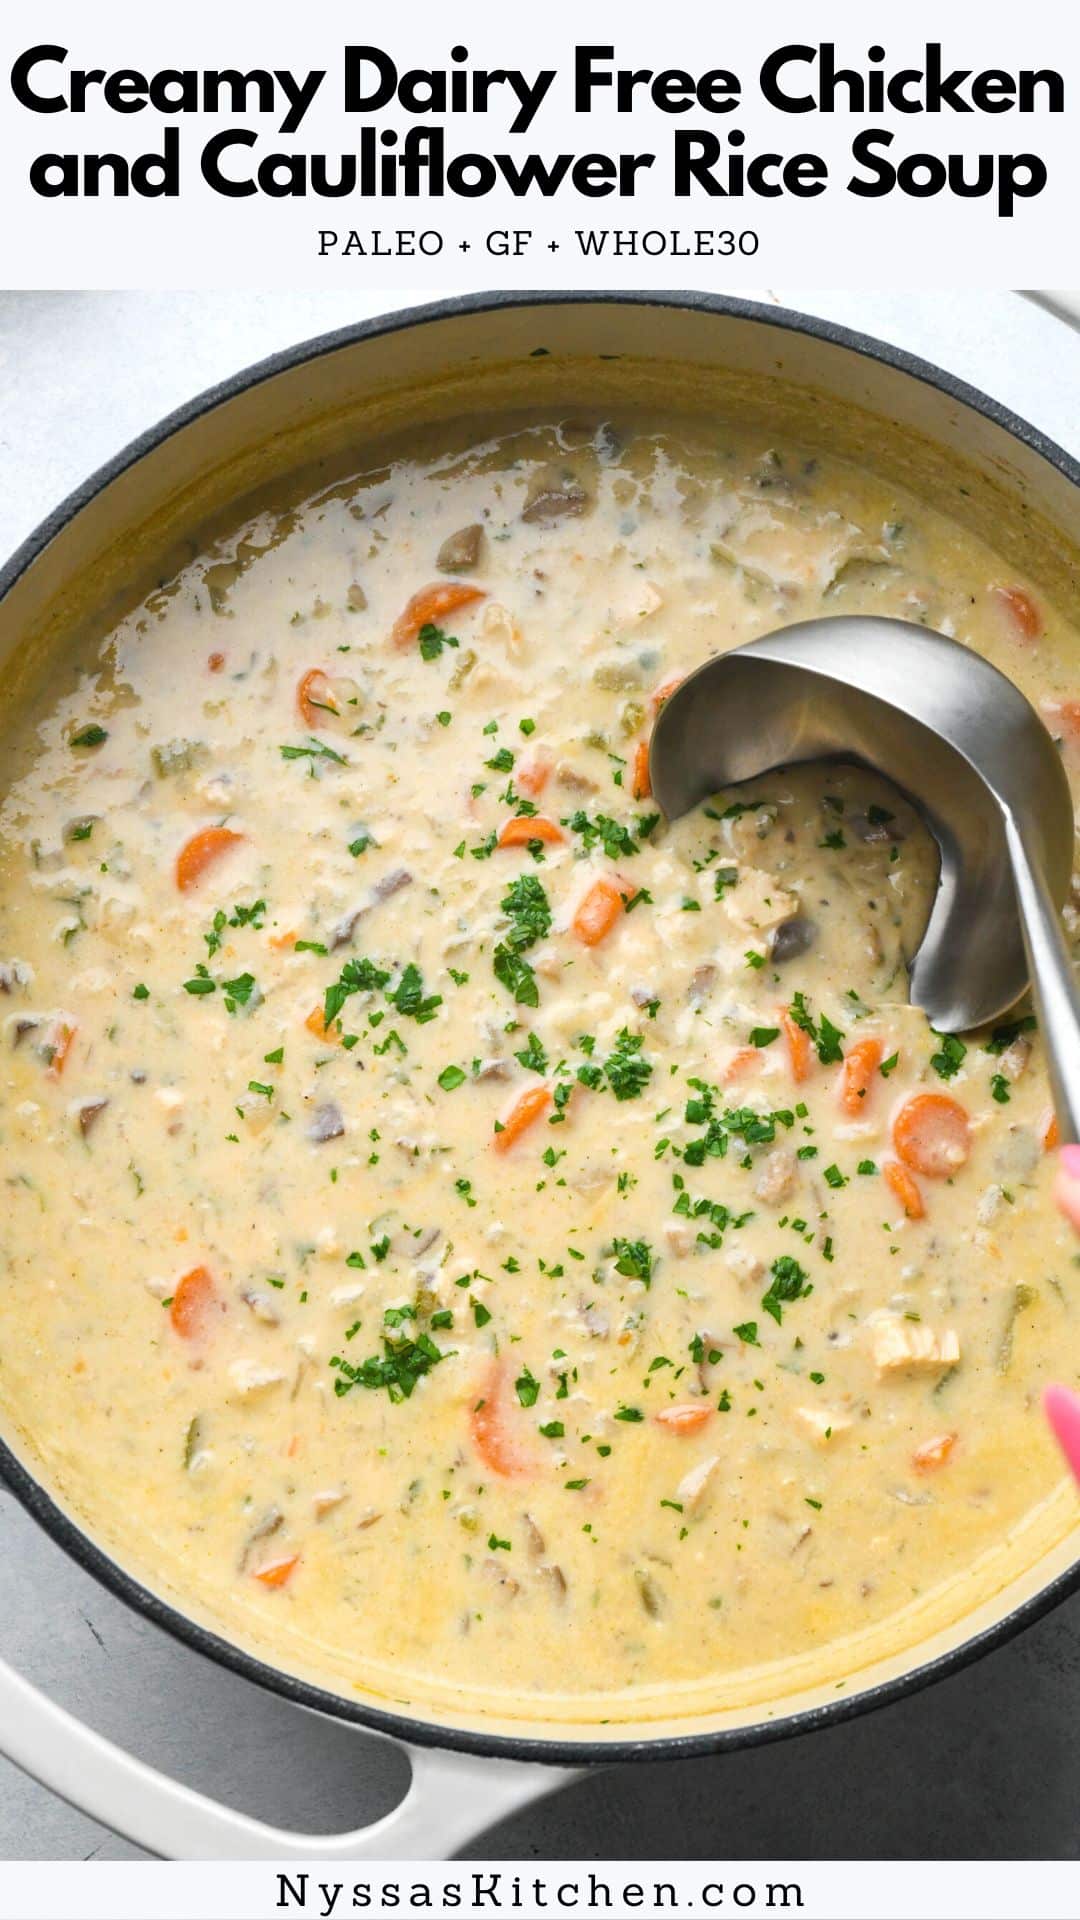 Thanks to cashew cream, this ultra creamy dairy free chicken and cauliflower rice soup is so satisfying and delicious that you'd never know it was dairy free unless you made it yourself! Made with all the same flavors of a classic chicken and rice soup, but paleo and whole30 friendly for a healthy meal that the whole family will love. Cashew free option included in the recipe notes!